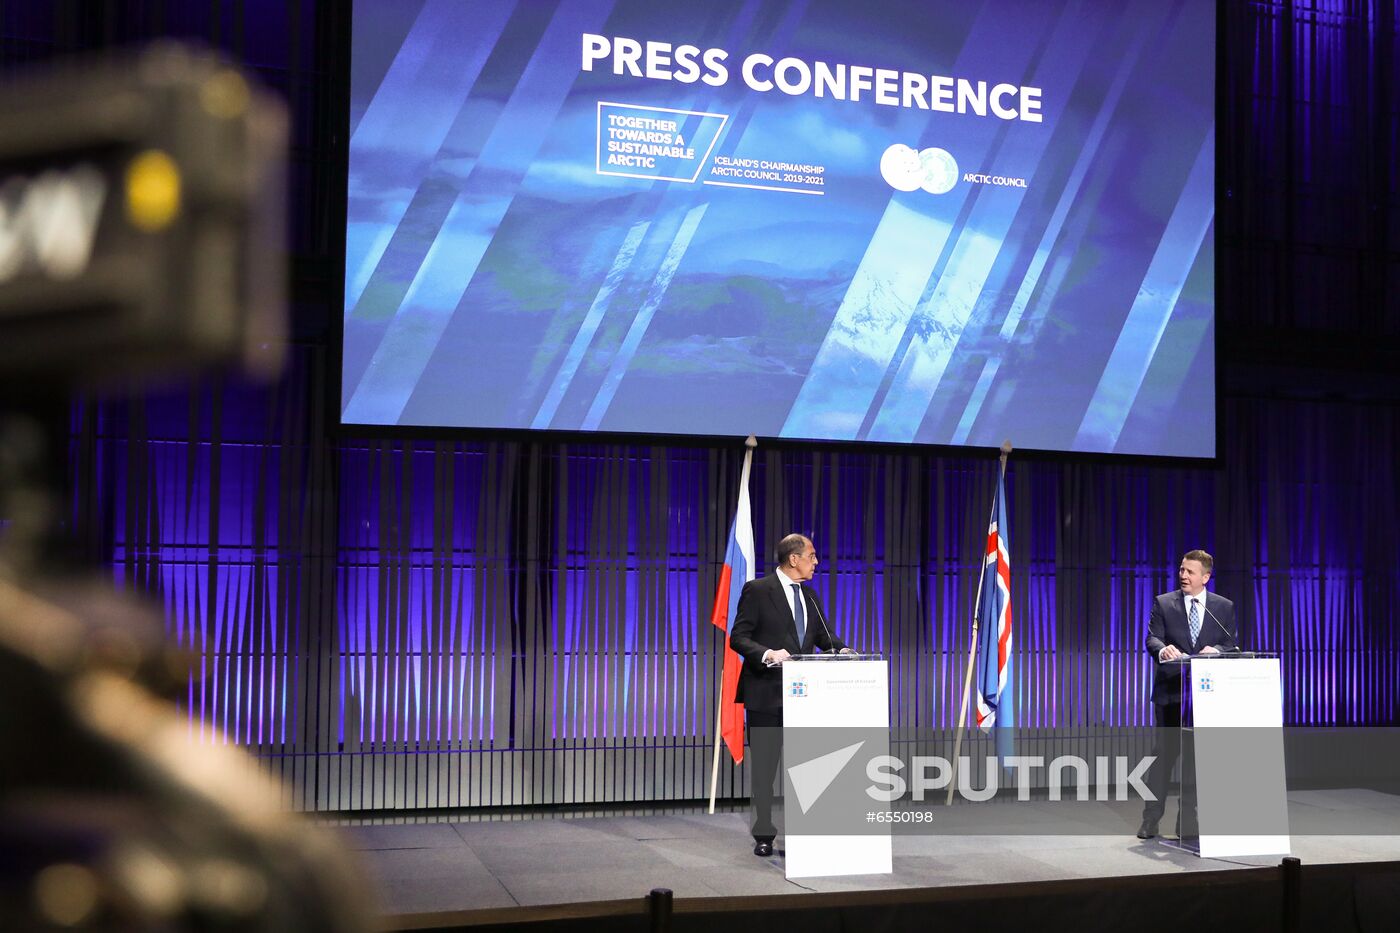 Iceland Arctic Council Ministerial Summit